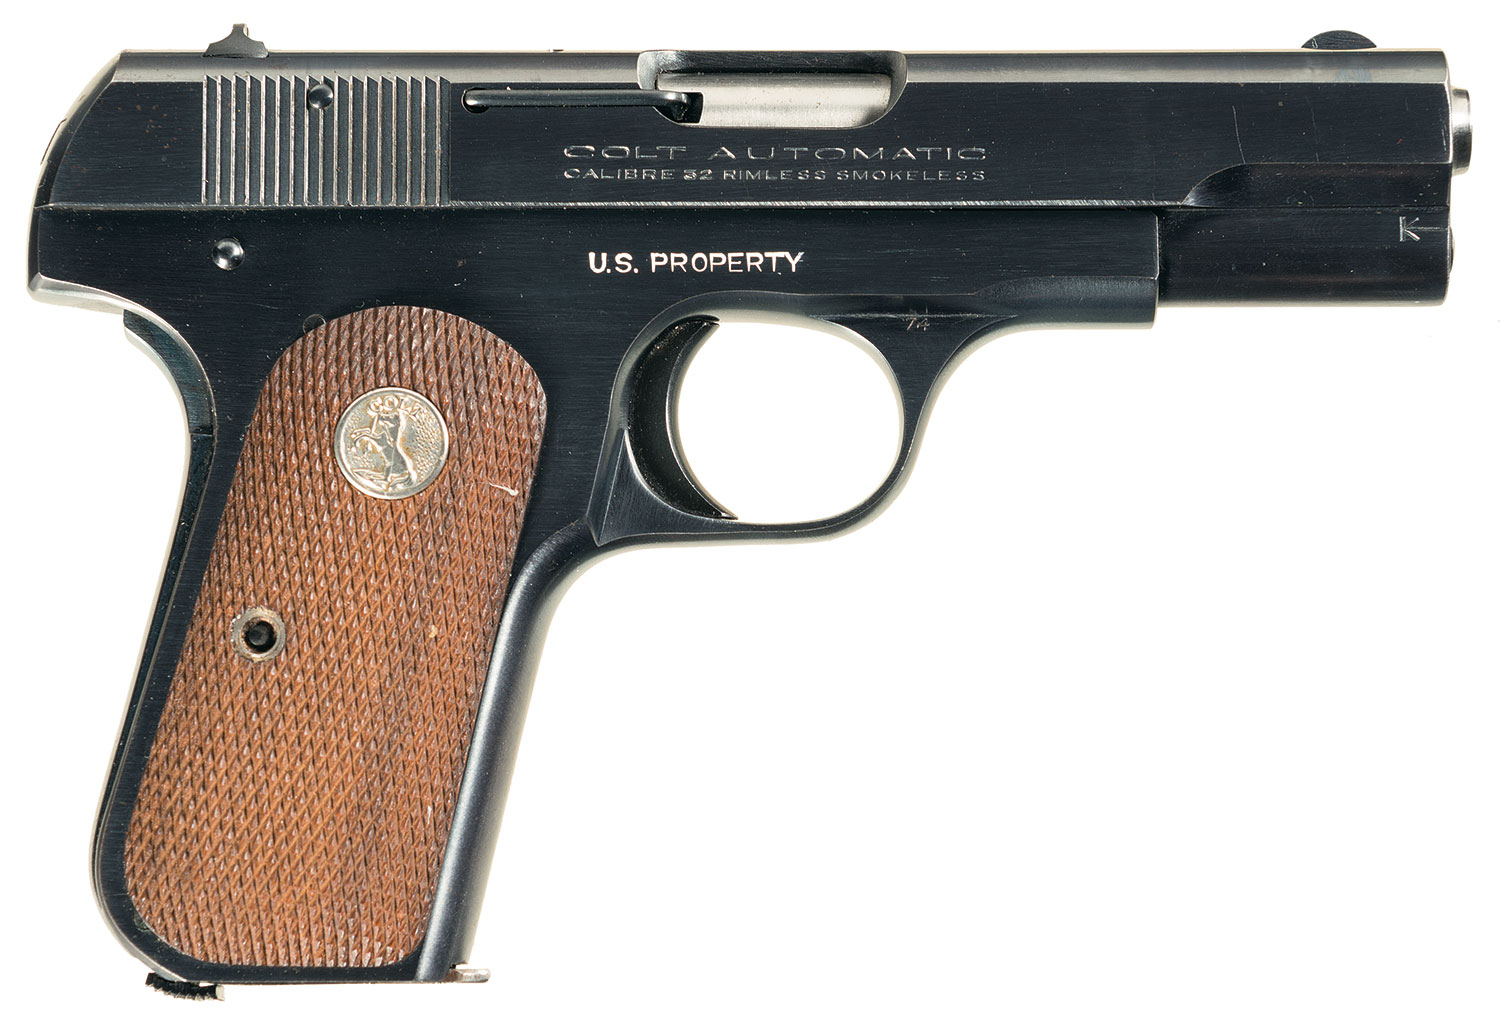 Lot 1452: Scarce Factory Documented OSS Shipped U.S. Property Marked Colt Model 1903 Pocket Hammerless Semi-Automatic Pistol with Boxed OSS-Pattern Concealment Holster and Two "Cloak and Dagger" Pattern Patches